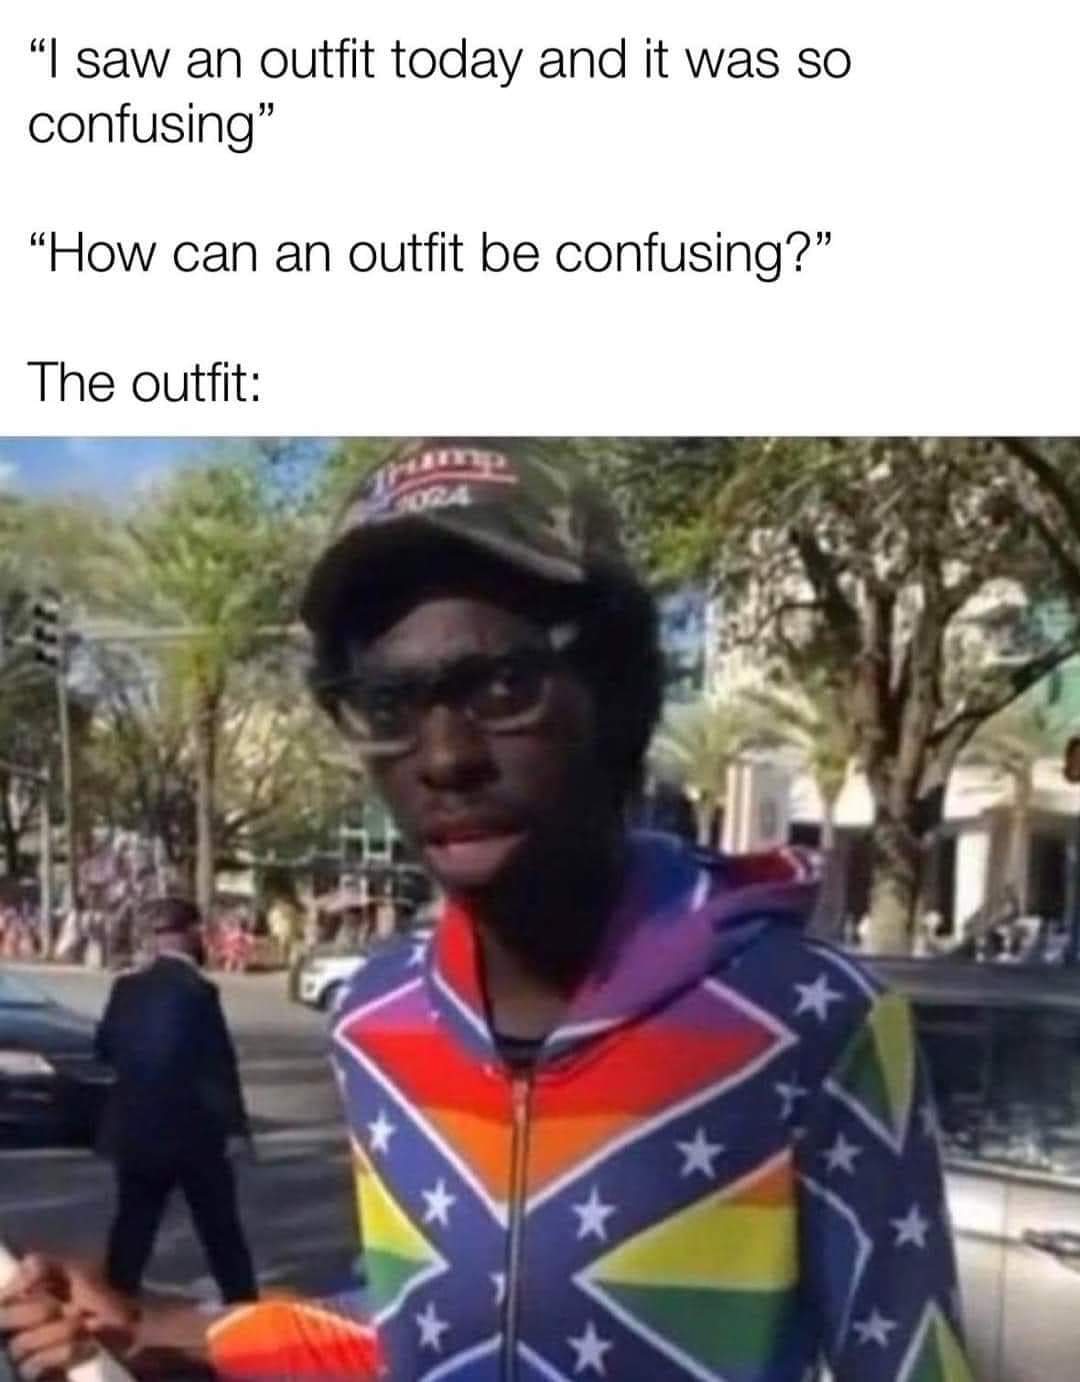 confusing_outfit.jpg